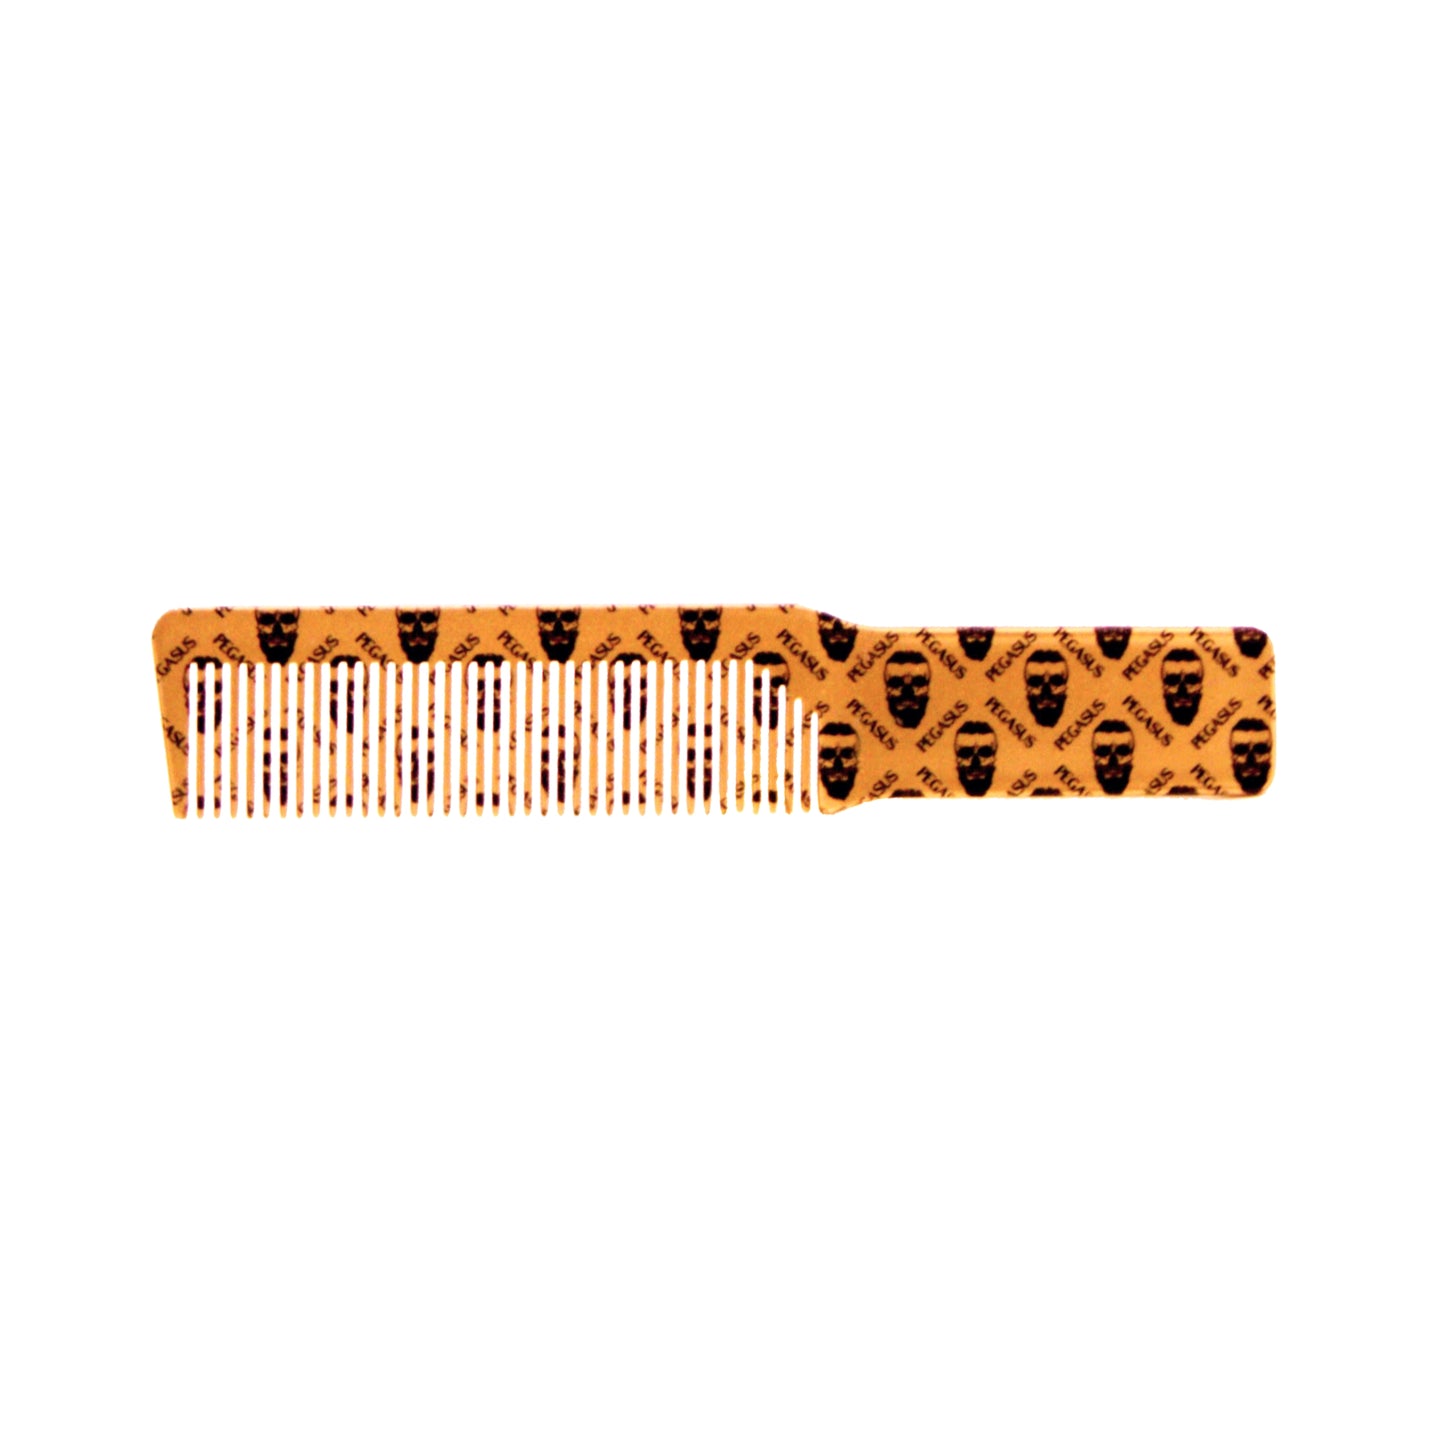 Pegasus Skulleto 516A, 8in Hard Rubber Fine Tooth Klipper Comb, Handmade, Seamless, Smooth Edges, Anti Static, Heat and Chemically Resistant Comb | Peines de goma dura - Gold